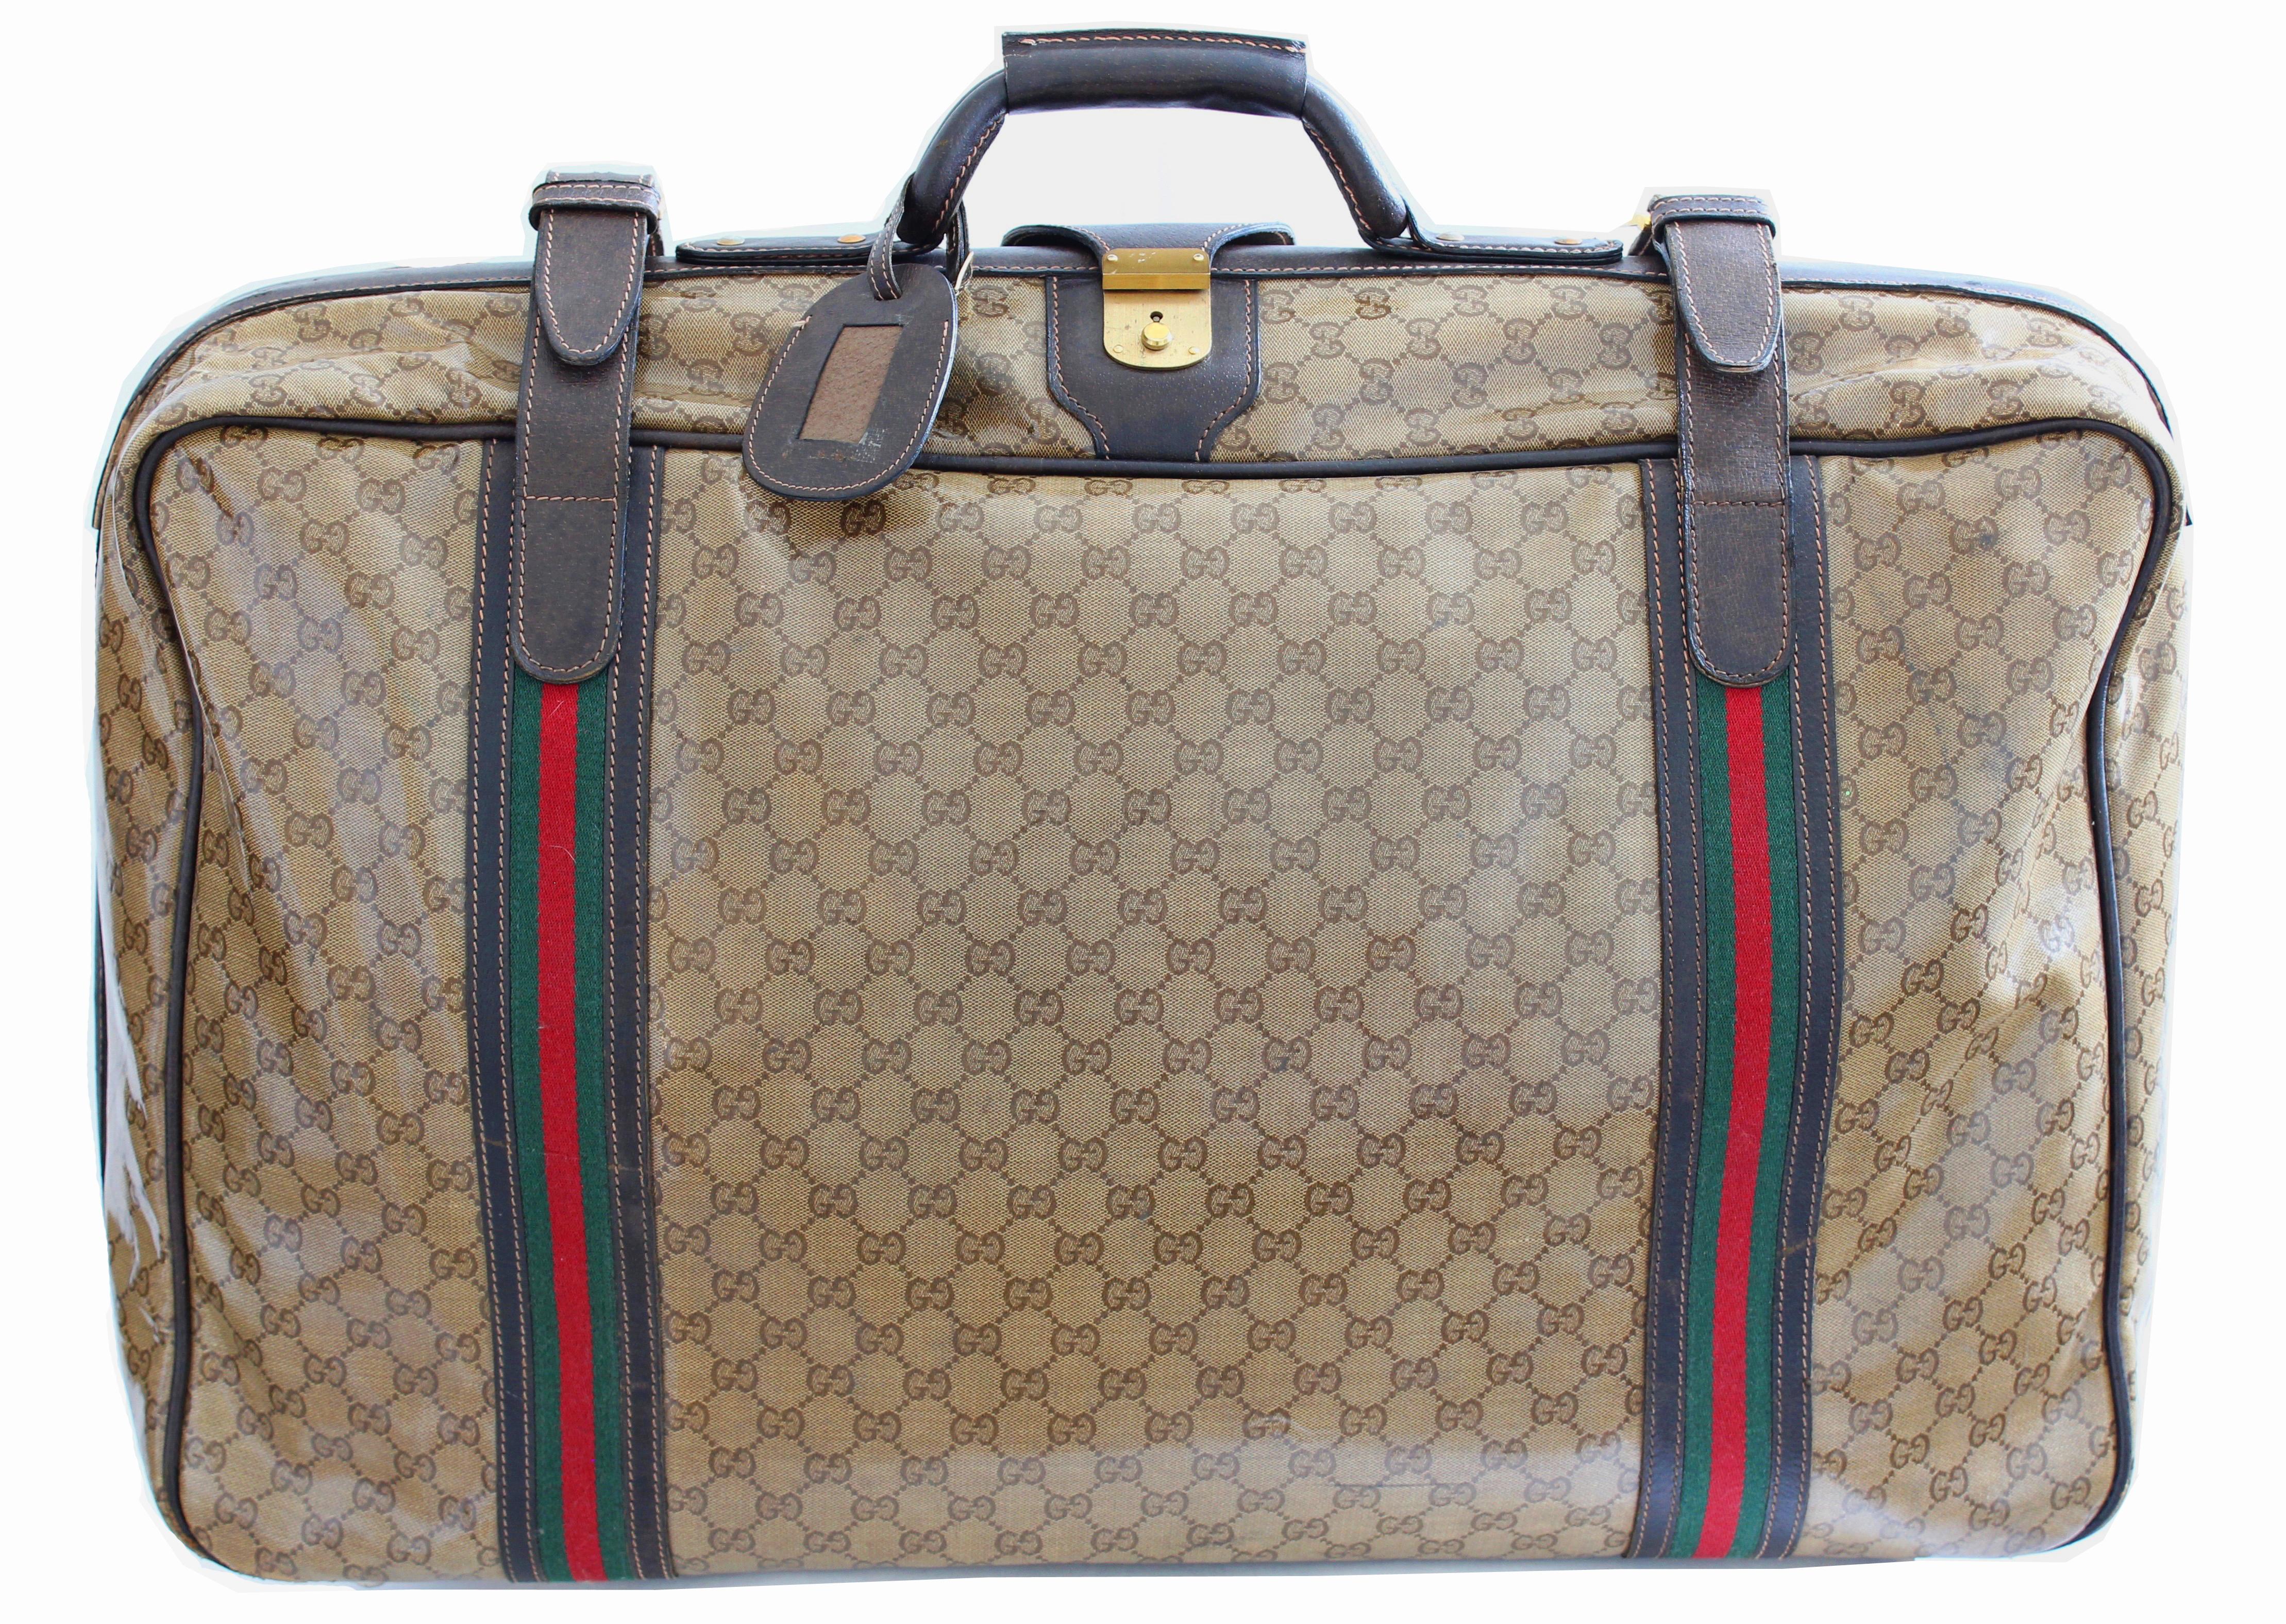 Travel in style with this classic Gucci soft side suitcase, most likely made in the late 70s.  Made from their coated canvas with GG logos, it's trimmed in brown leather and fastens with two leather straps with webbing, two chunky brass zippers and